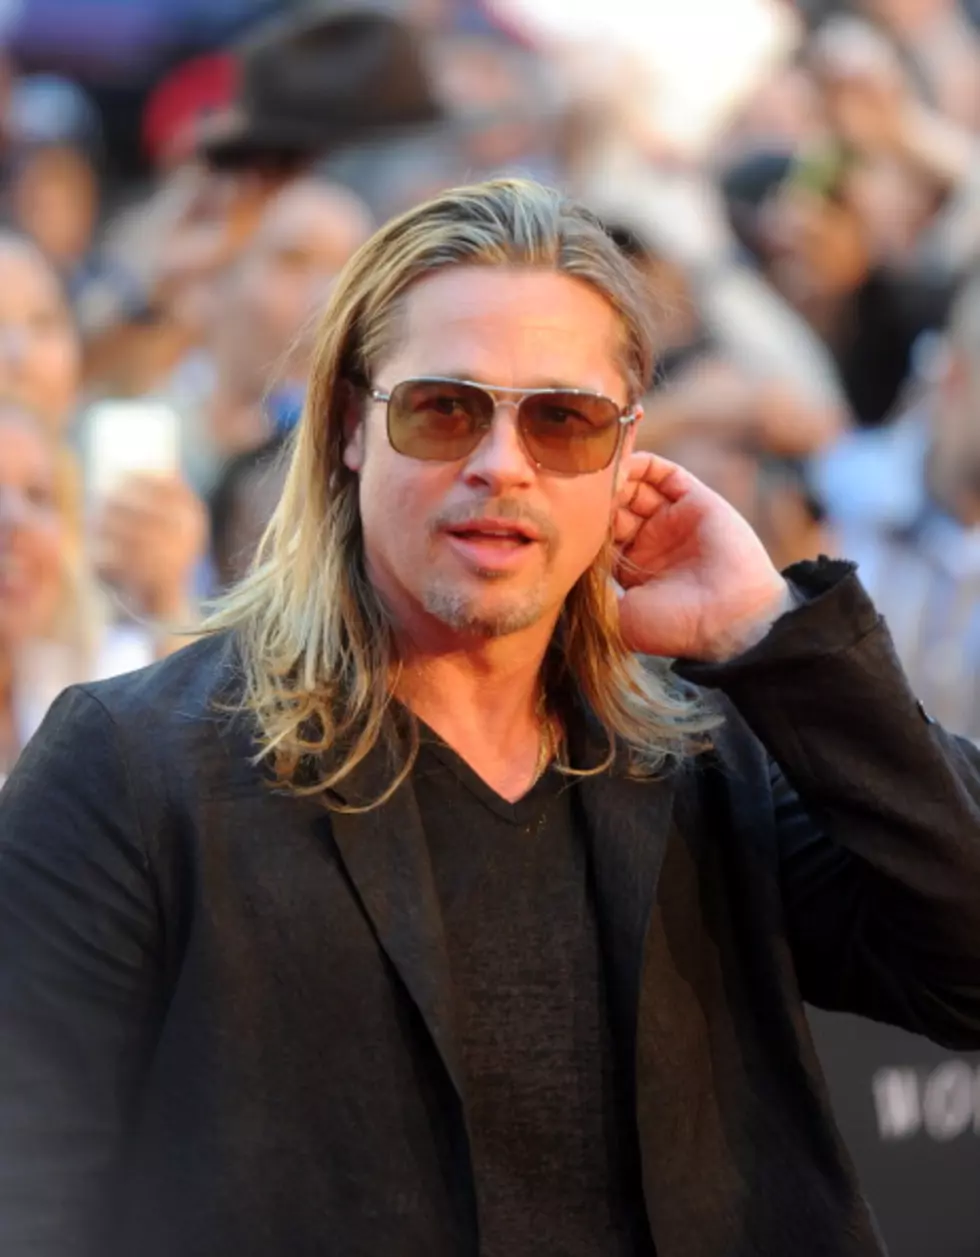 Brad Pitt Crashes Wedding, Takes Pictures With Bride & Groom [PHOTOS]